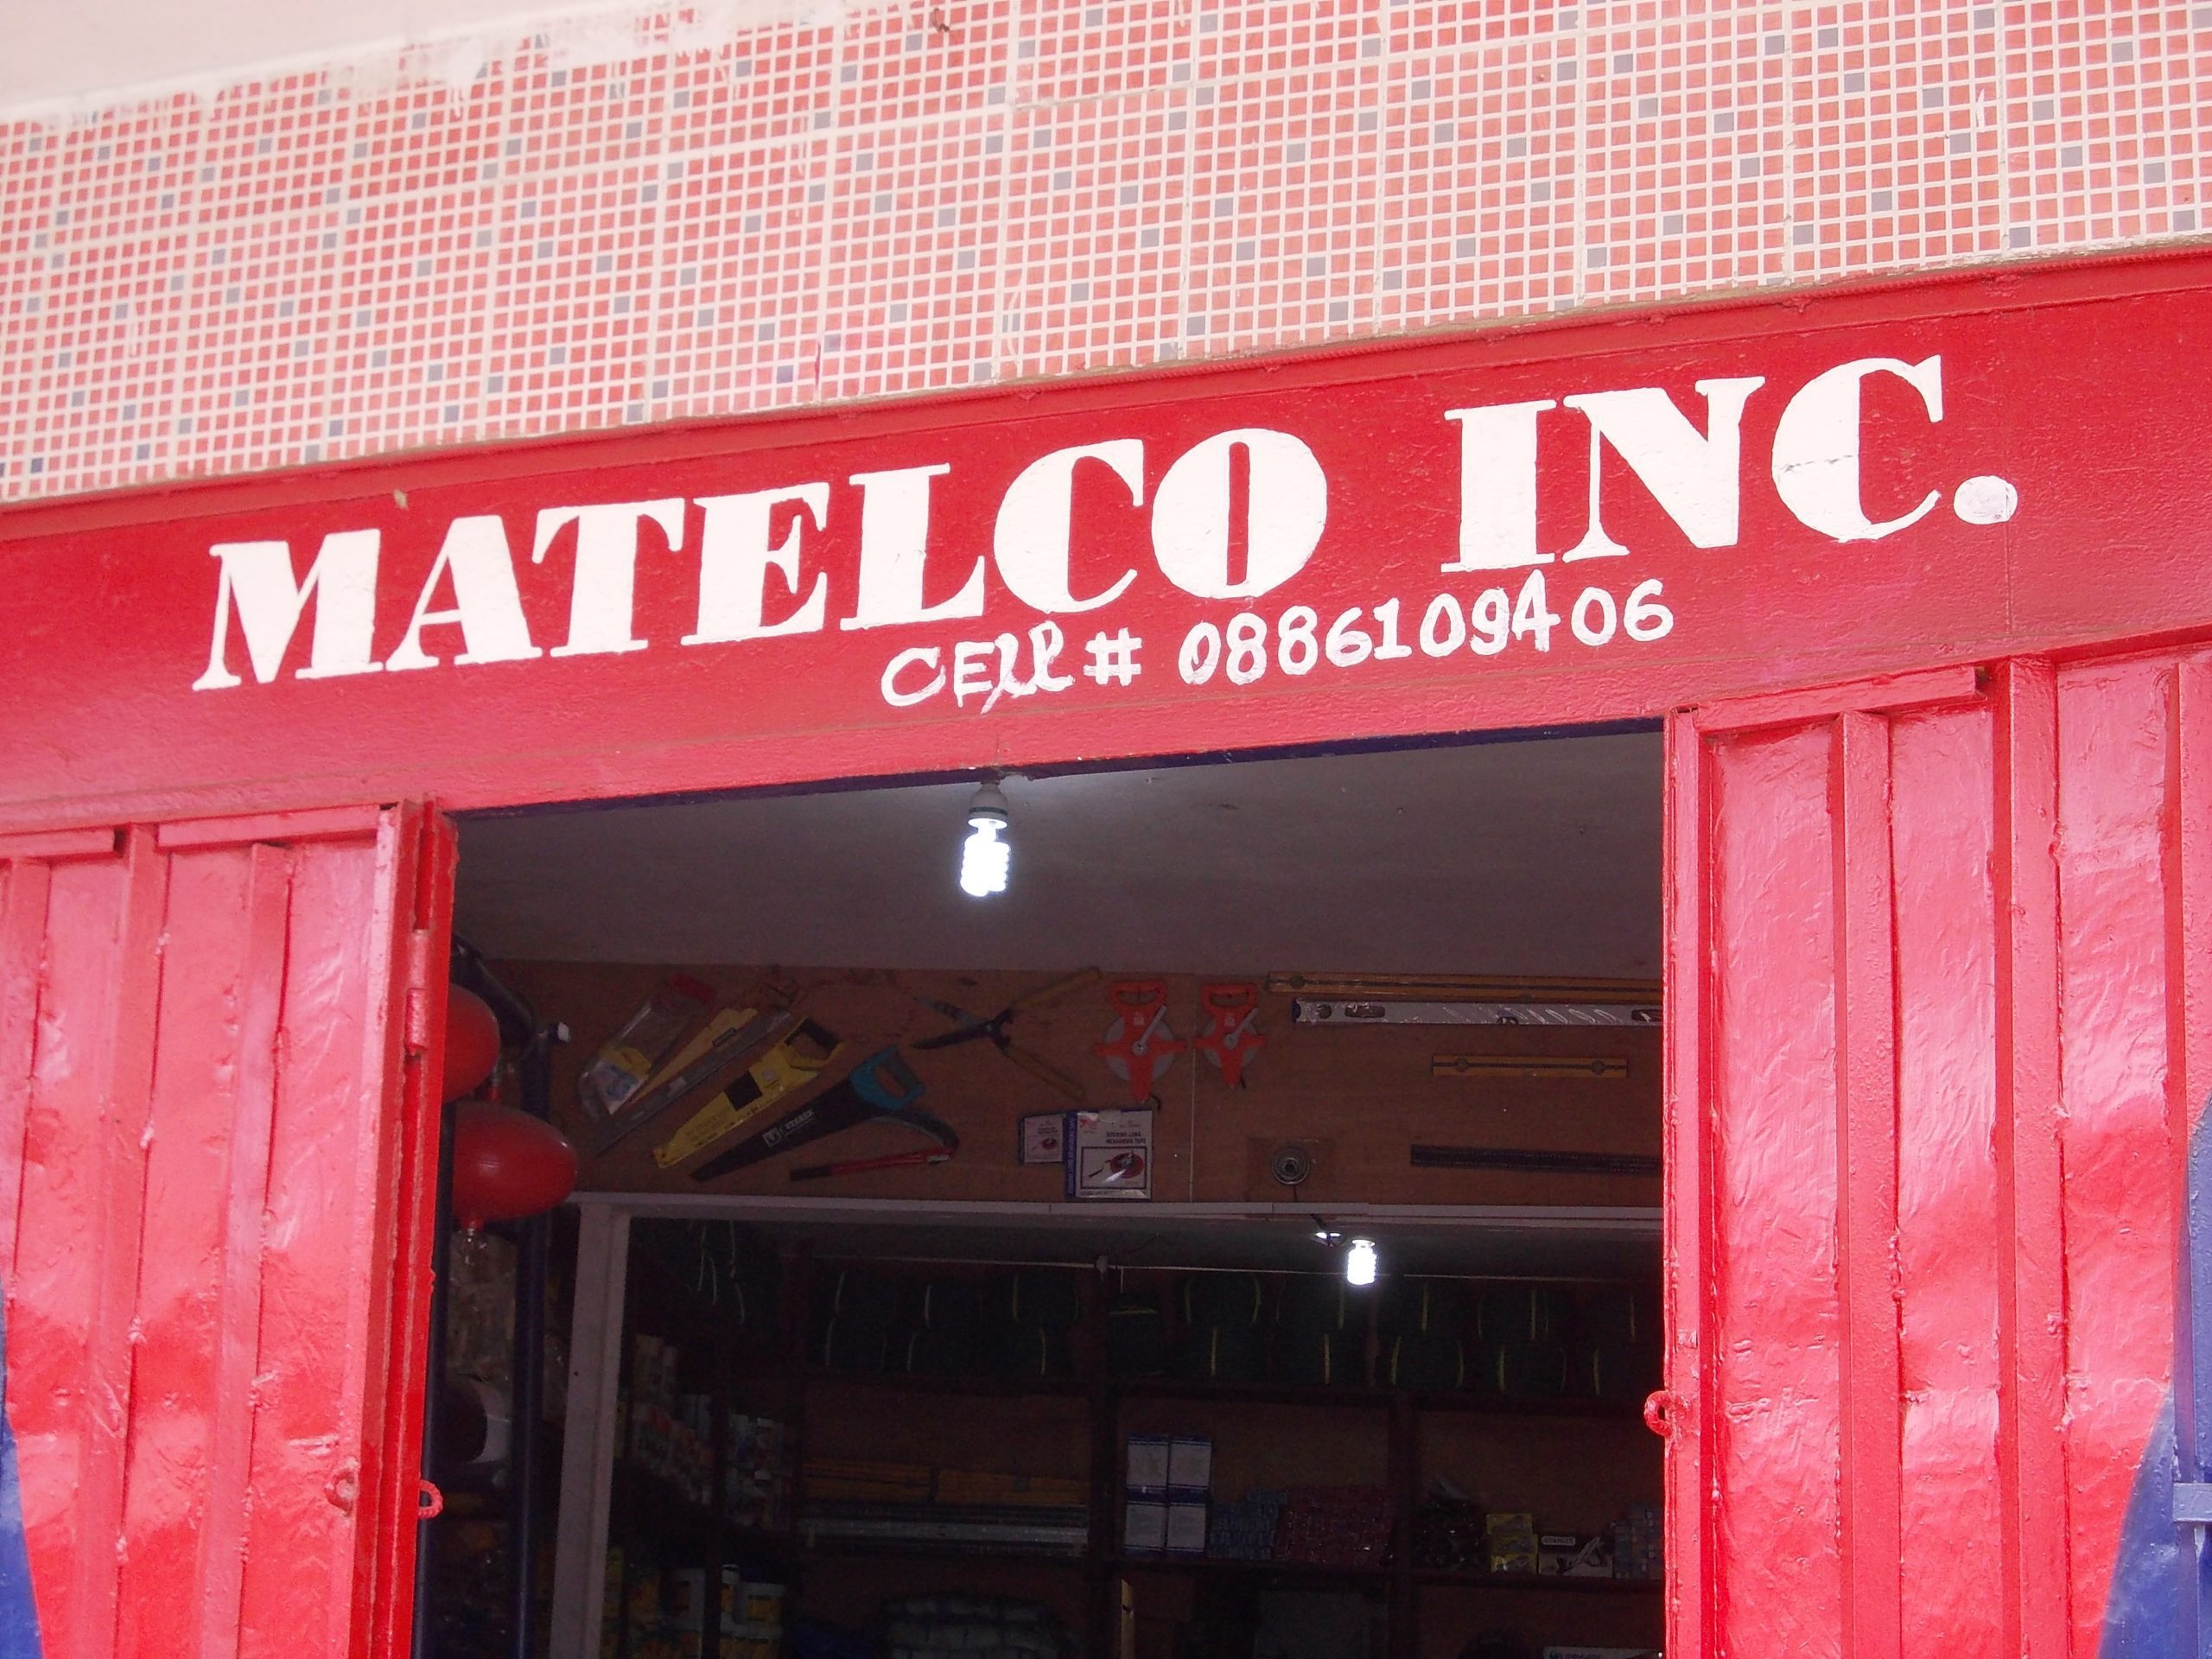 Matchmaking Event Builds Matelco’s Success